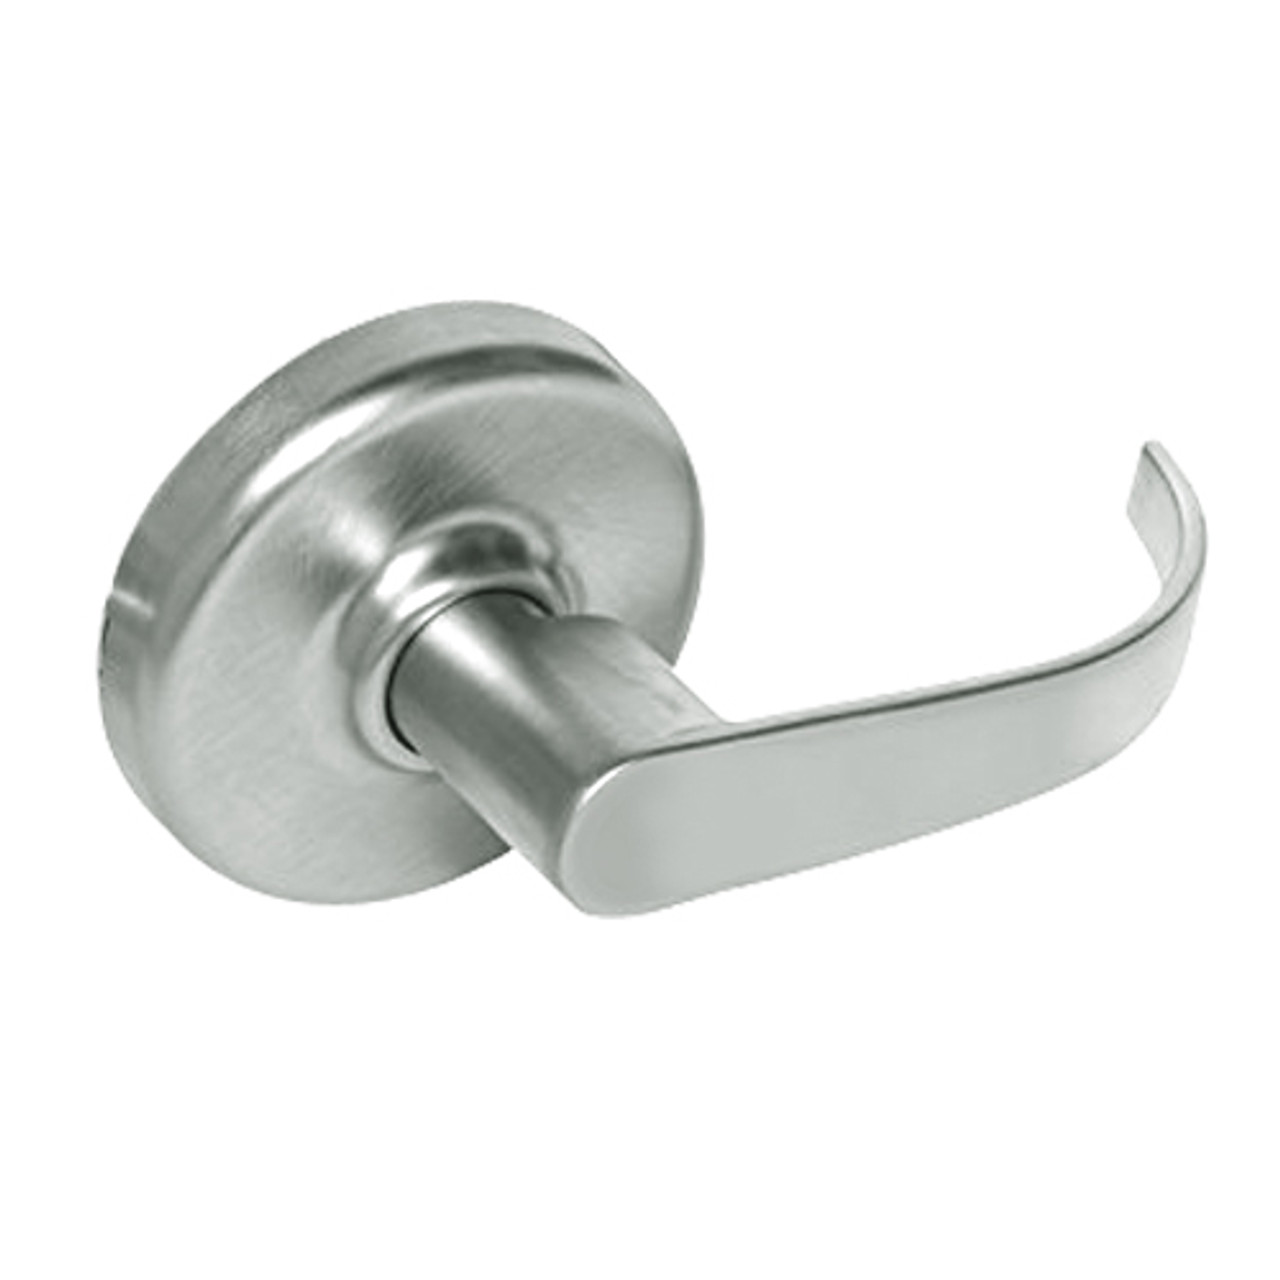 CL3320-PZD-618 Corbin CL3300 Series Extra Heavy Duty Privacy Cylindrical Locksets with Princeton Lever in Bright Nickel Plated Finish